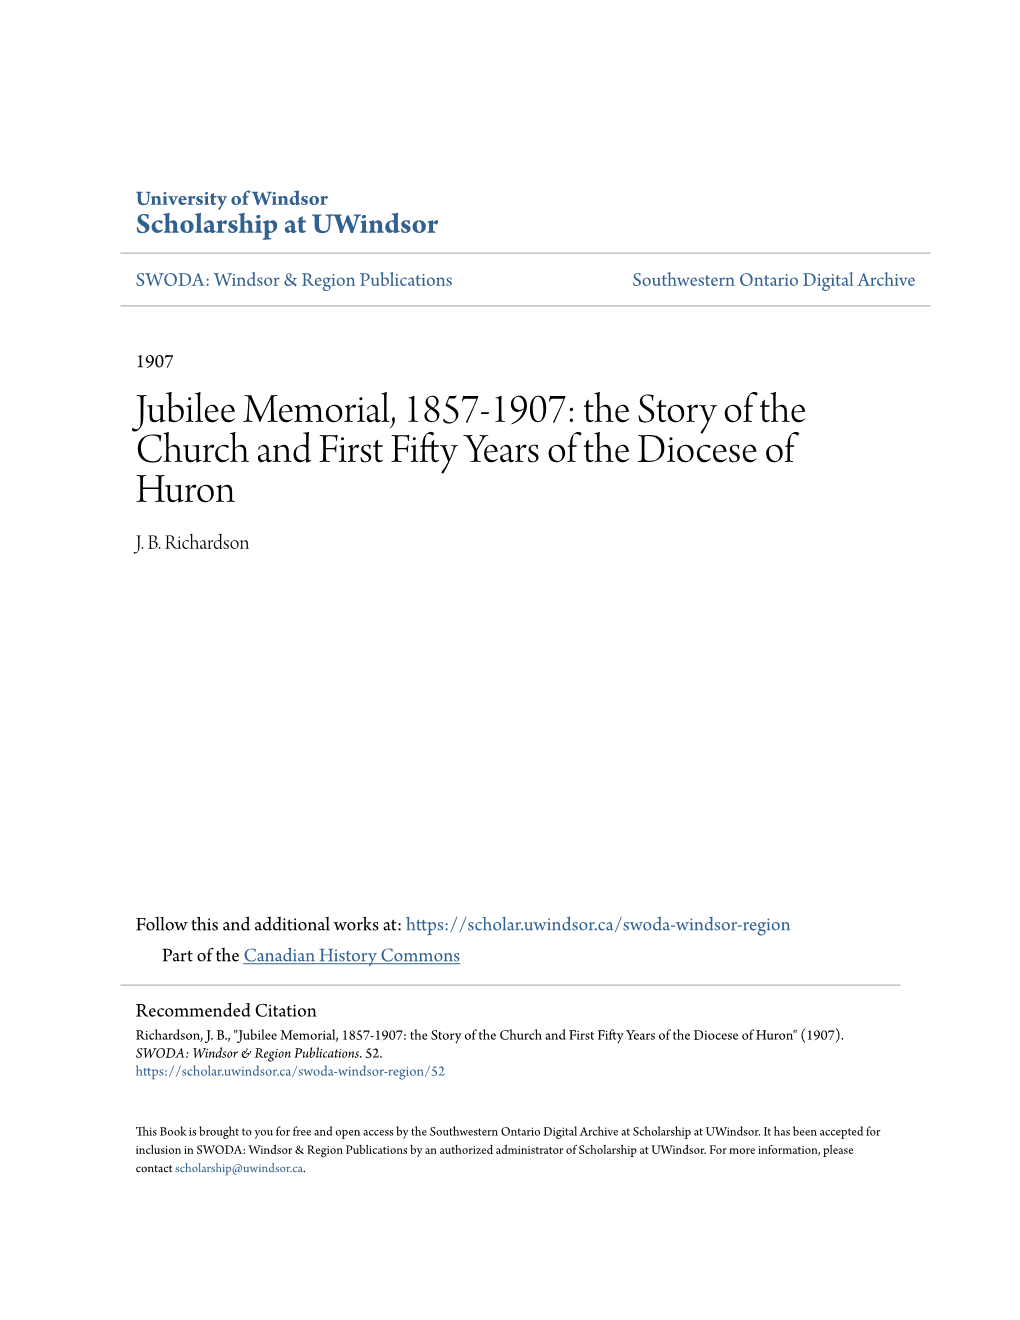 Jubilee Memorial, 1857-1907: the Story of the Church and First Fifty Years of the Diocese of Huron J